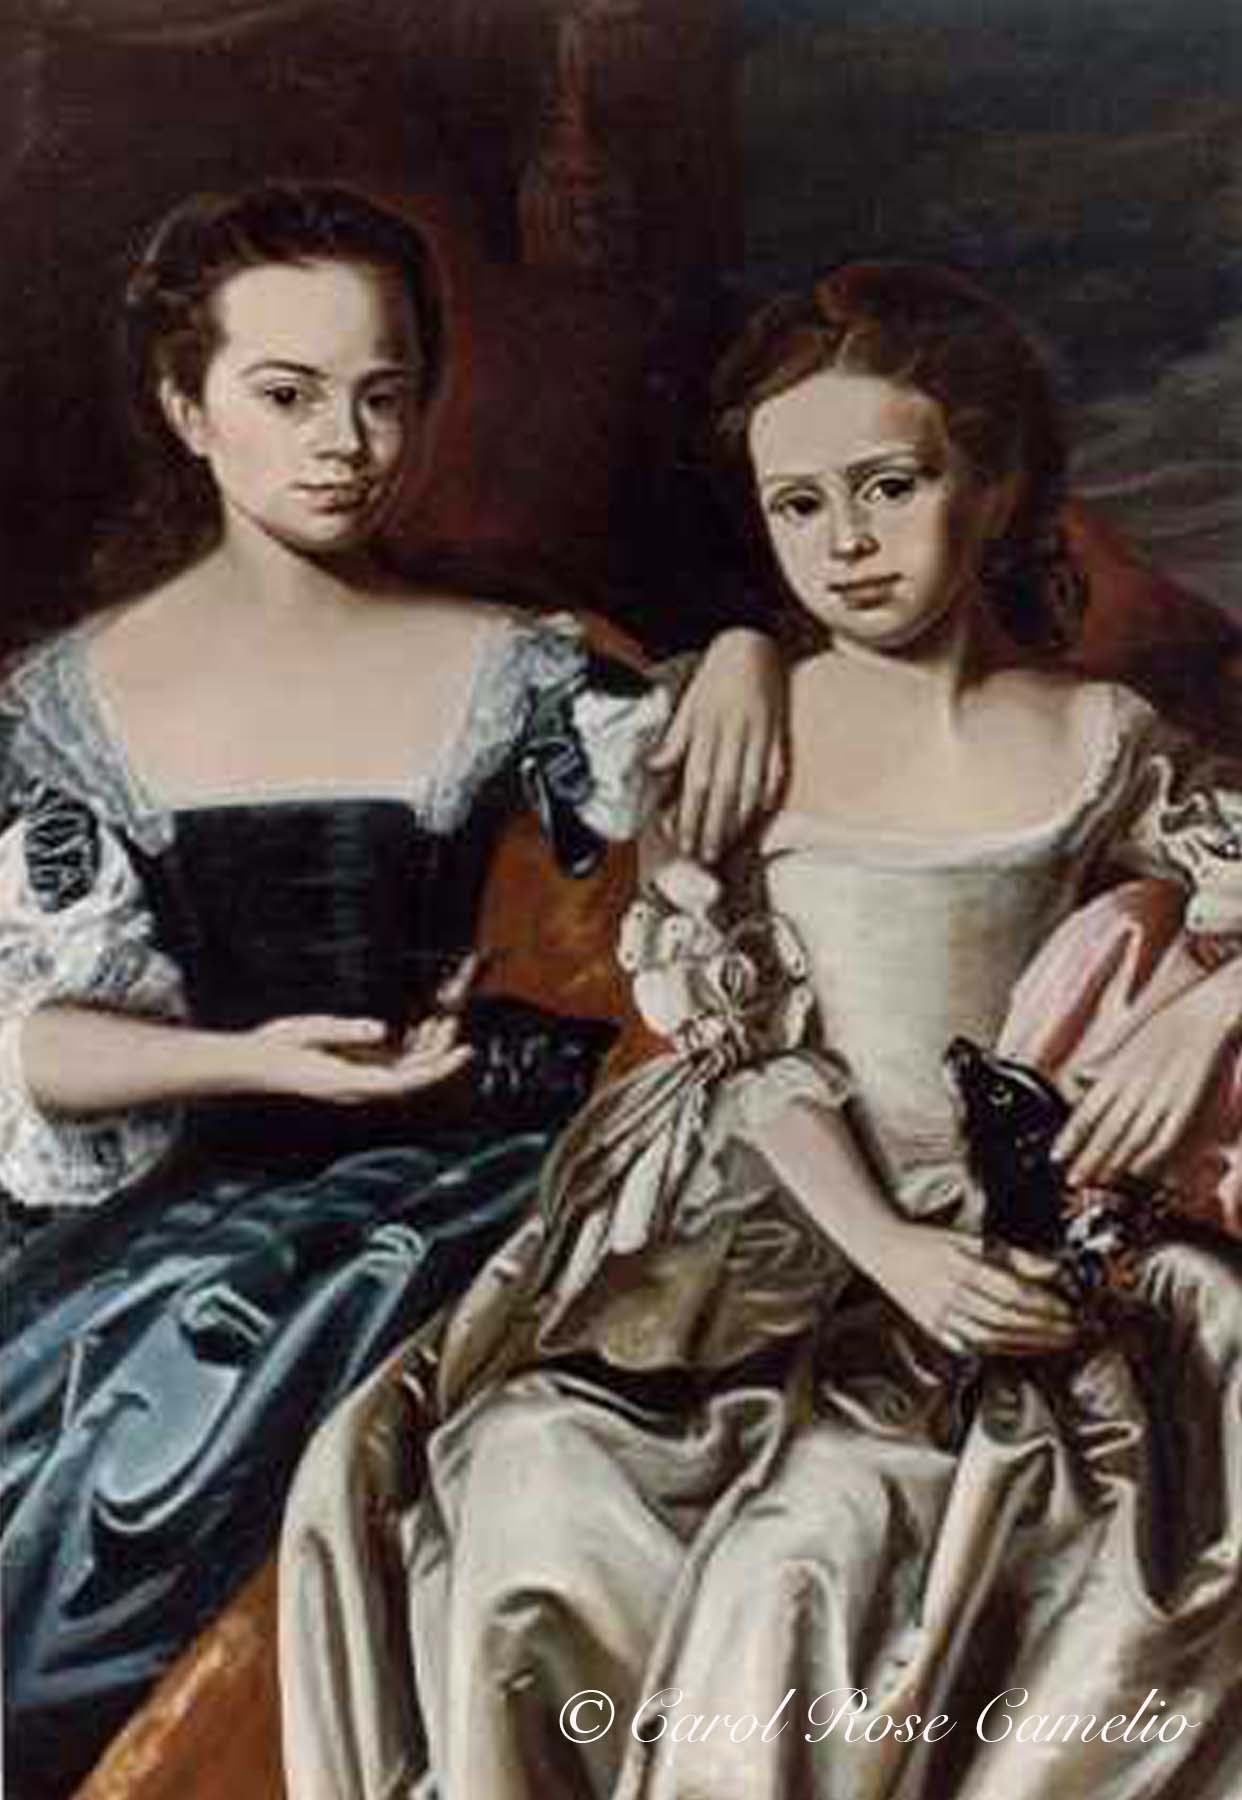 Mary and Elizabeth Royall: A portrait of the Royall sisters, two young women in period dress, holding a small bird and a tiny black dog respectively. A reproduction of the original 18th century painting by John Singleton Copley.